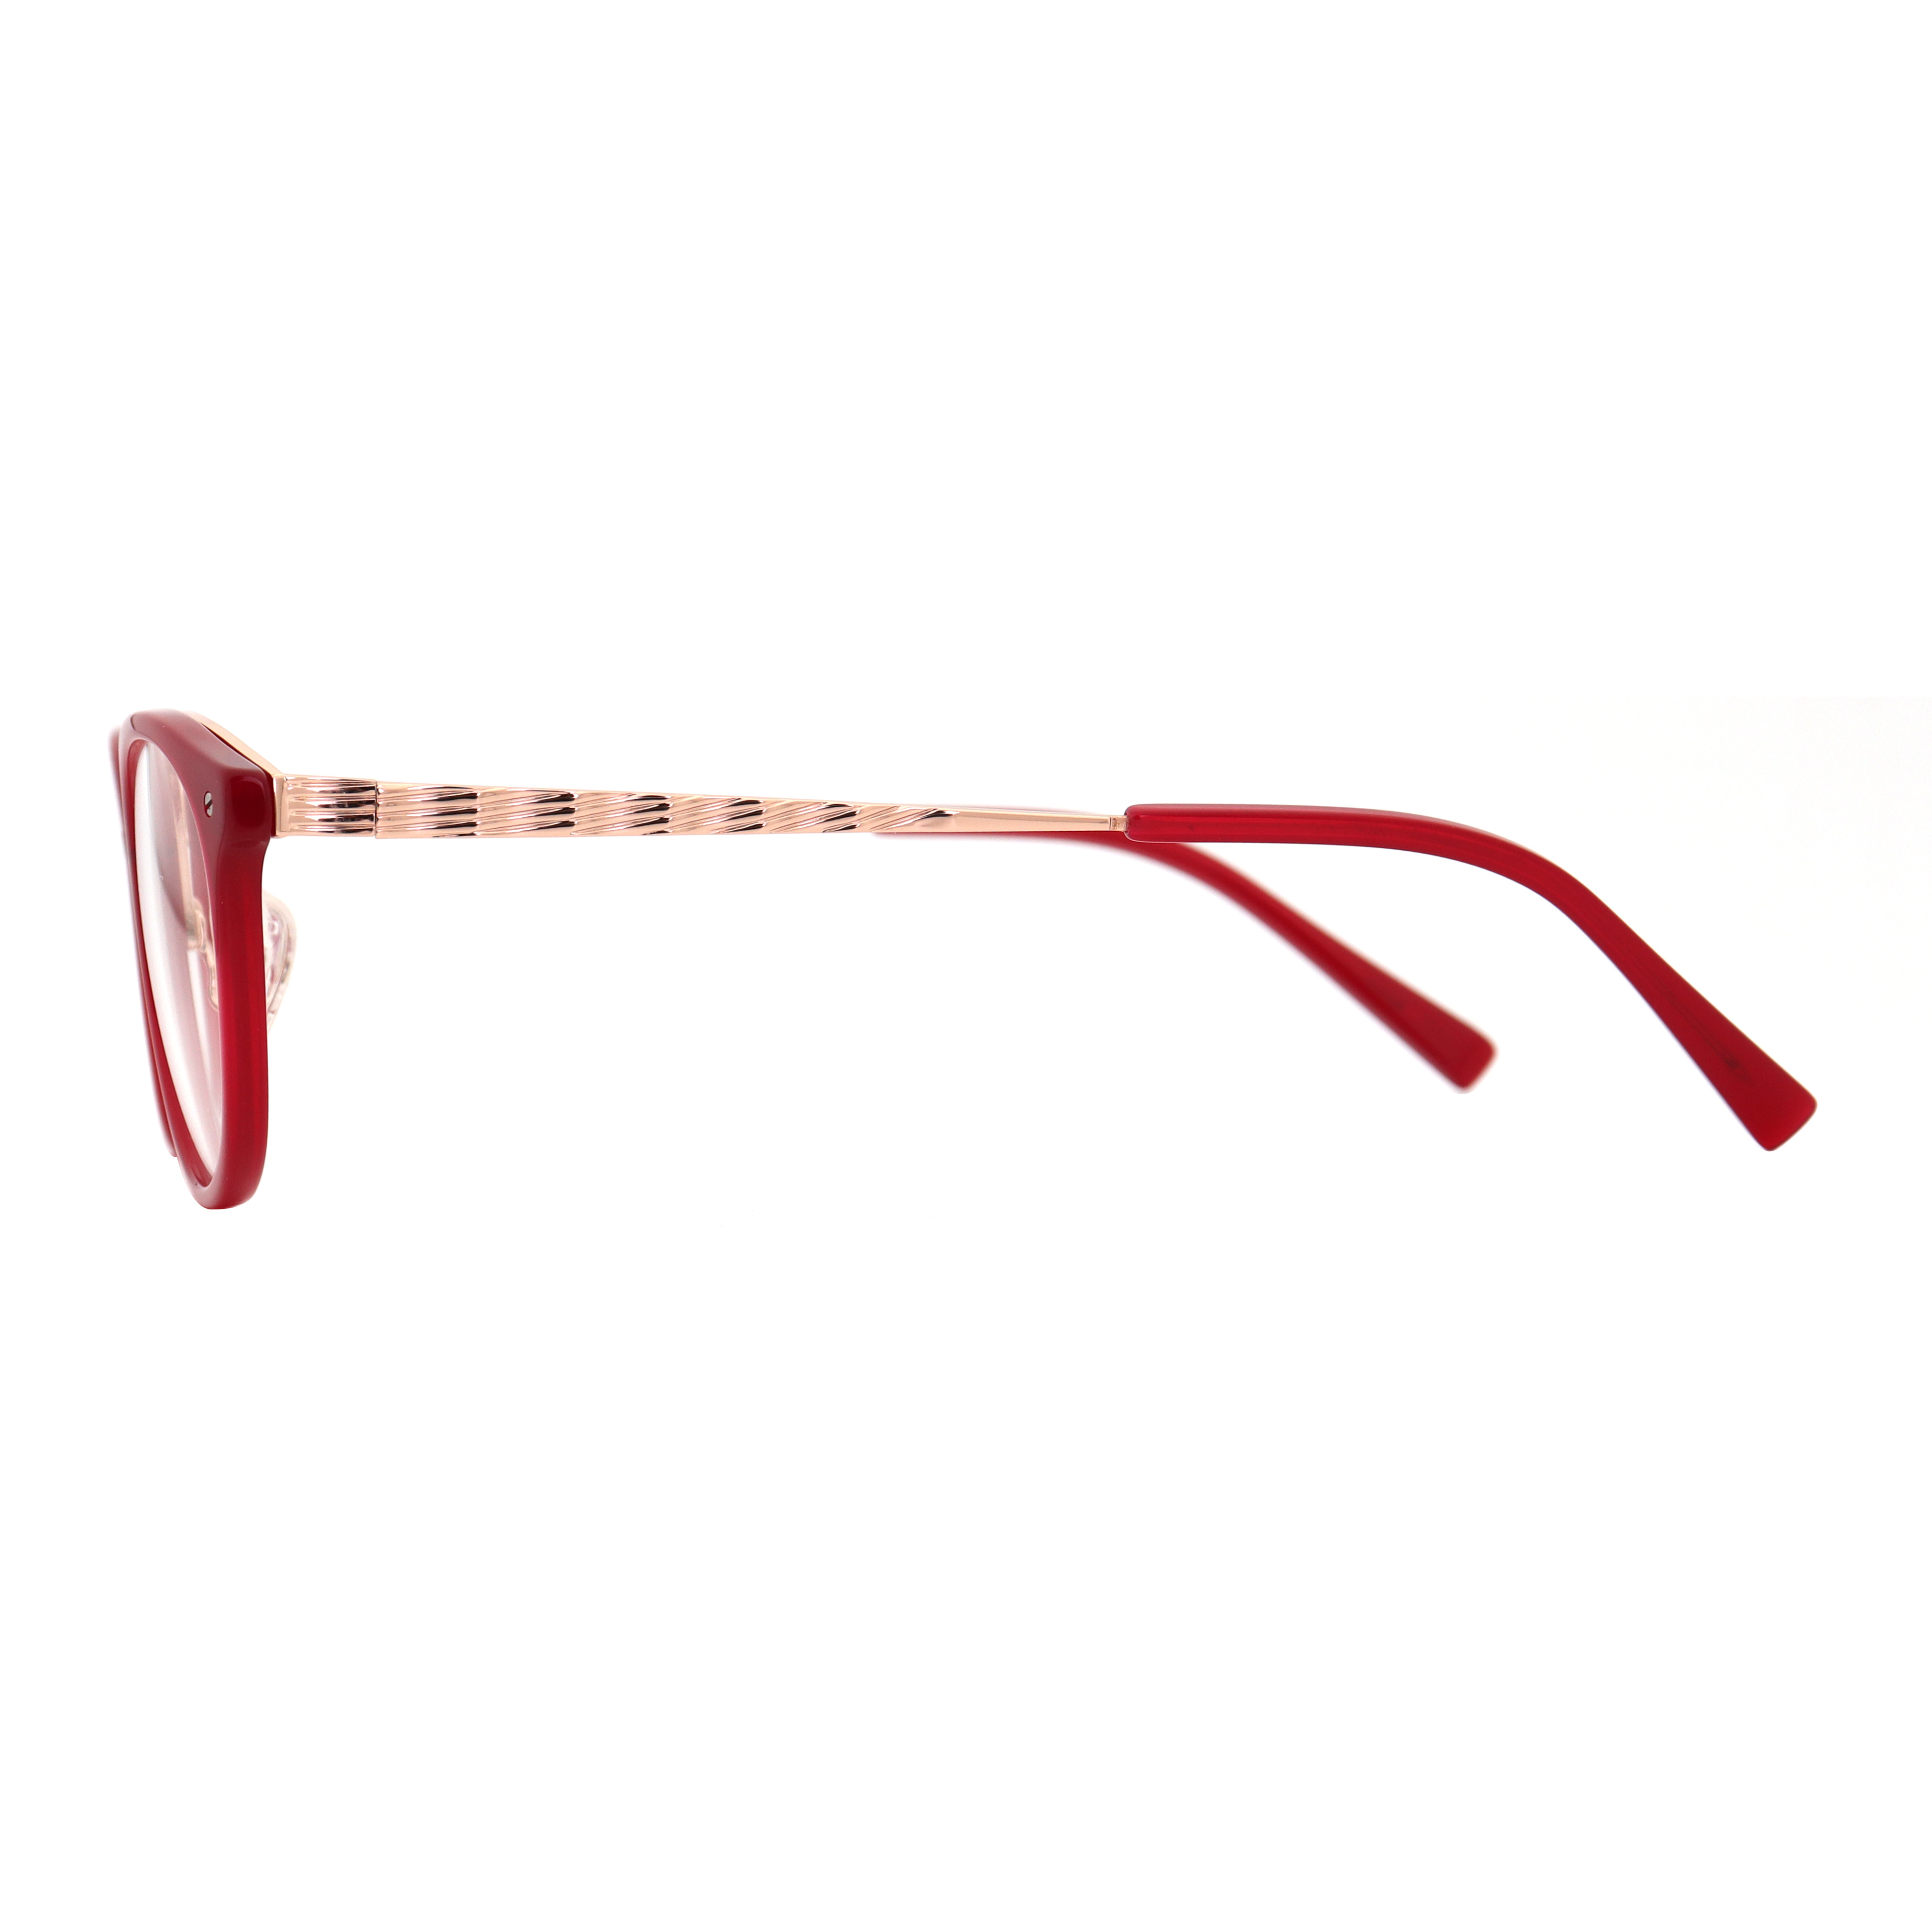 Fashion mixed material eyewear from classic style